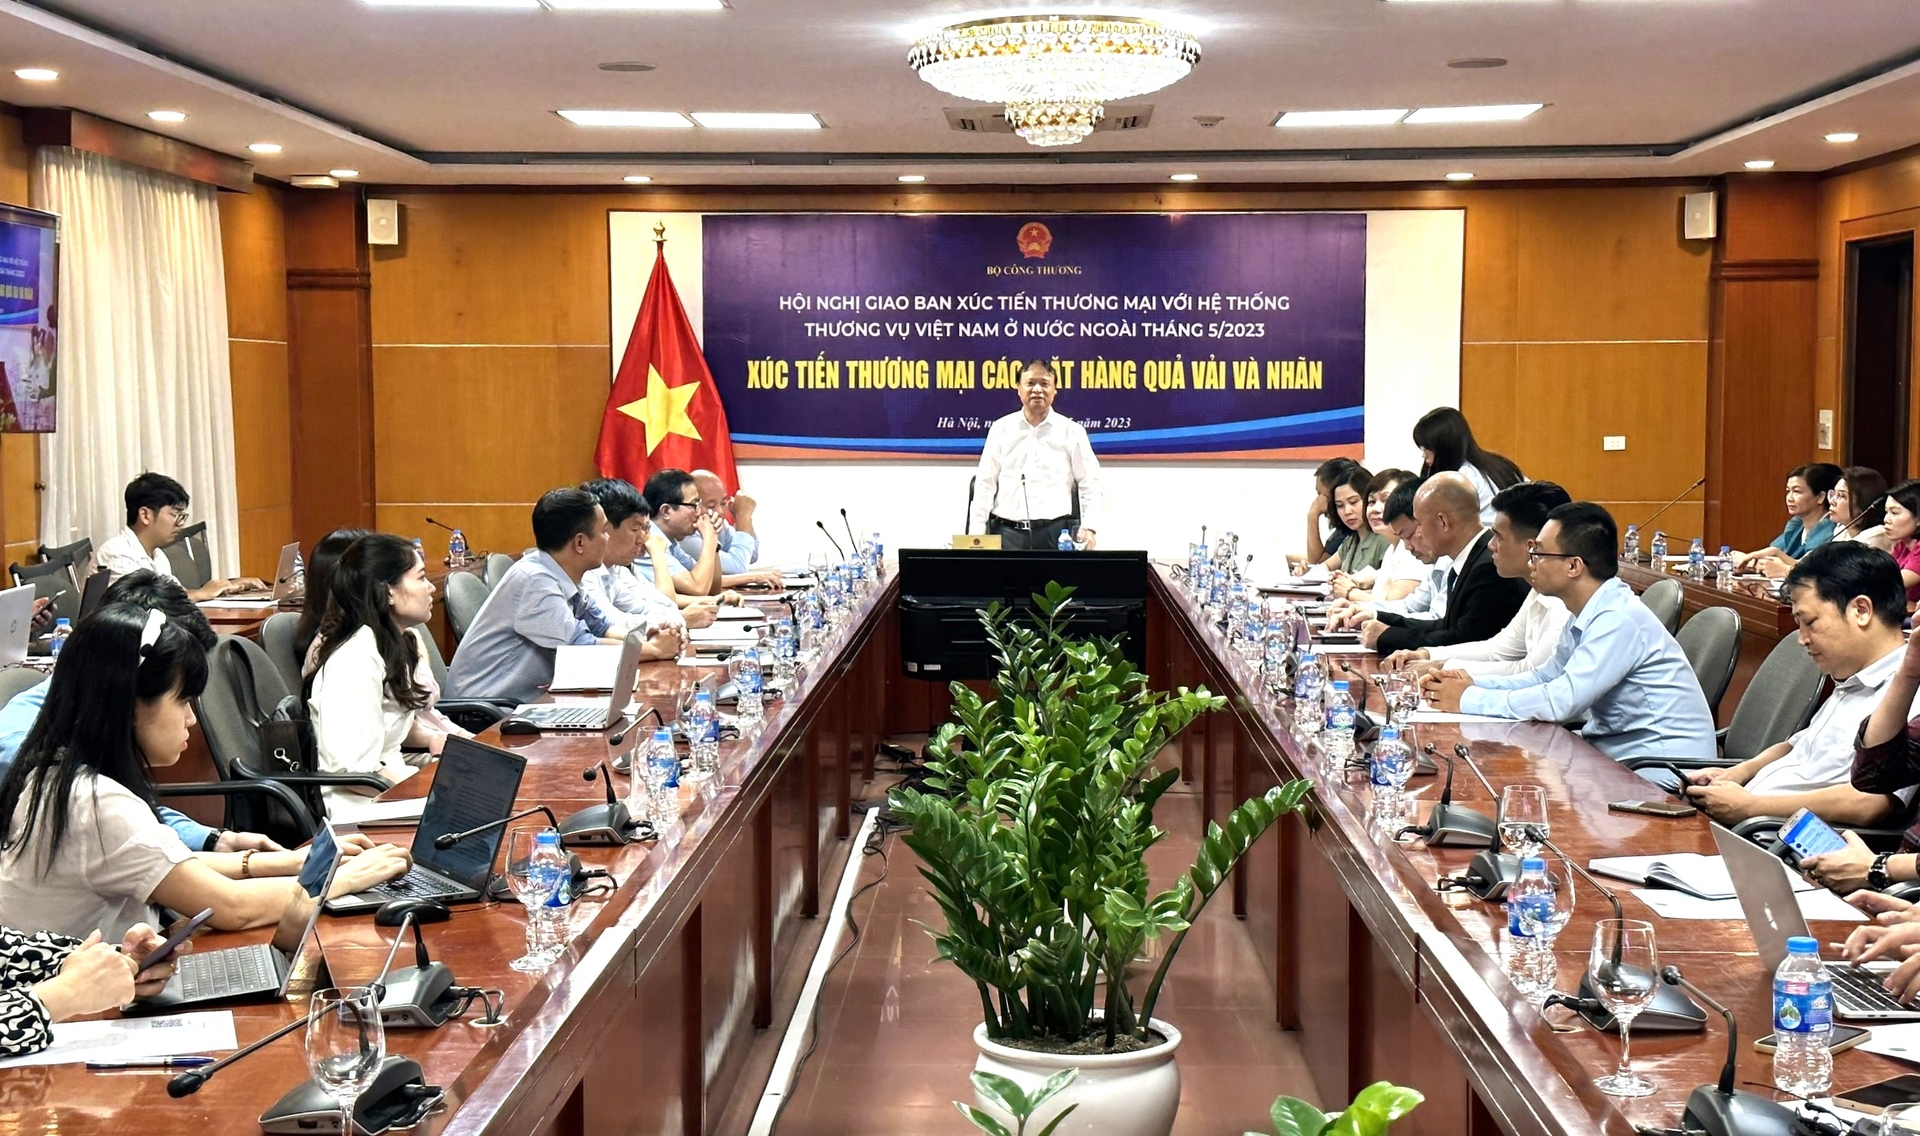 The trade promotion conference with the Vietnam Trade Office system abroad in May 2023 took place recently with the theme 'Promoting trade for lychee and longan products'. Photo: Quang Linh.